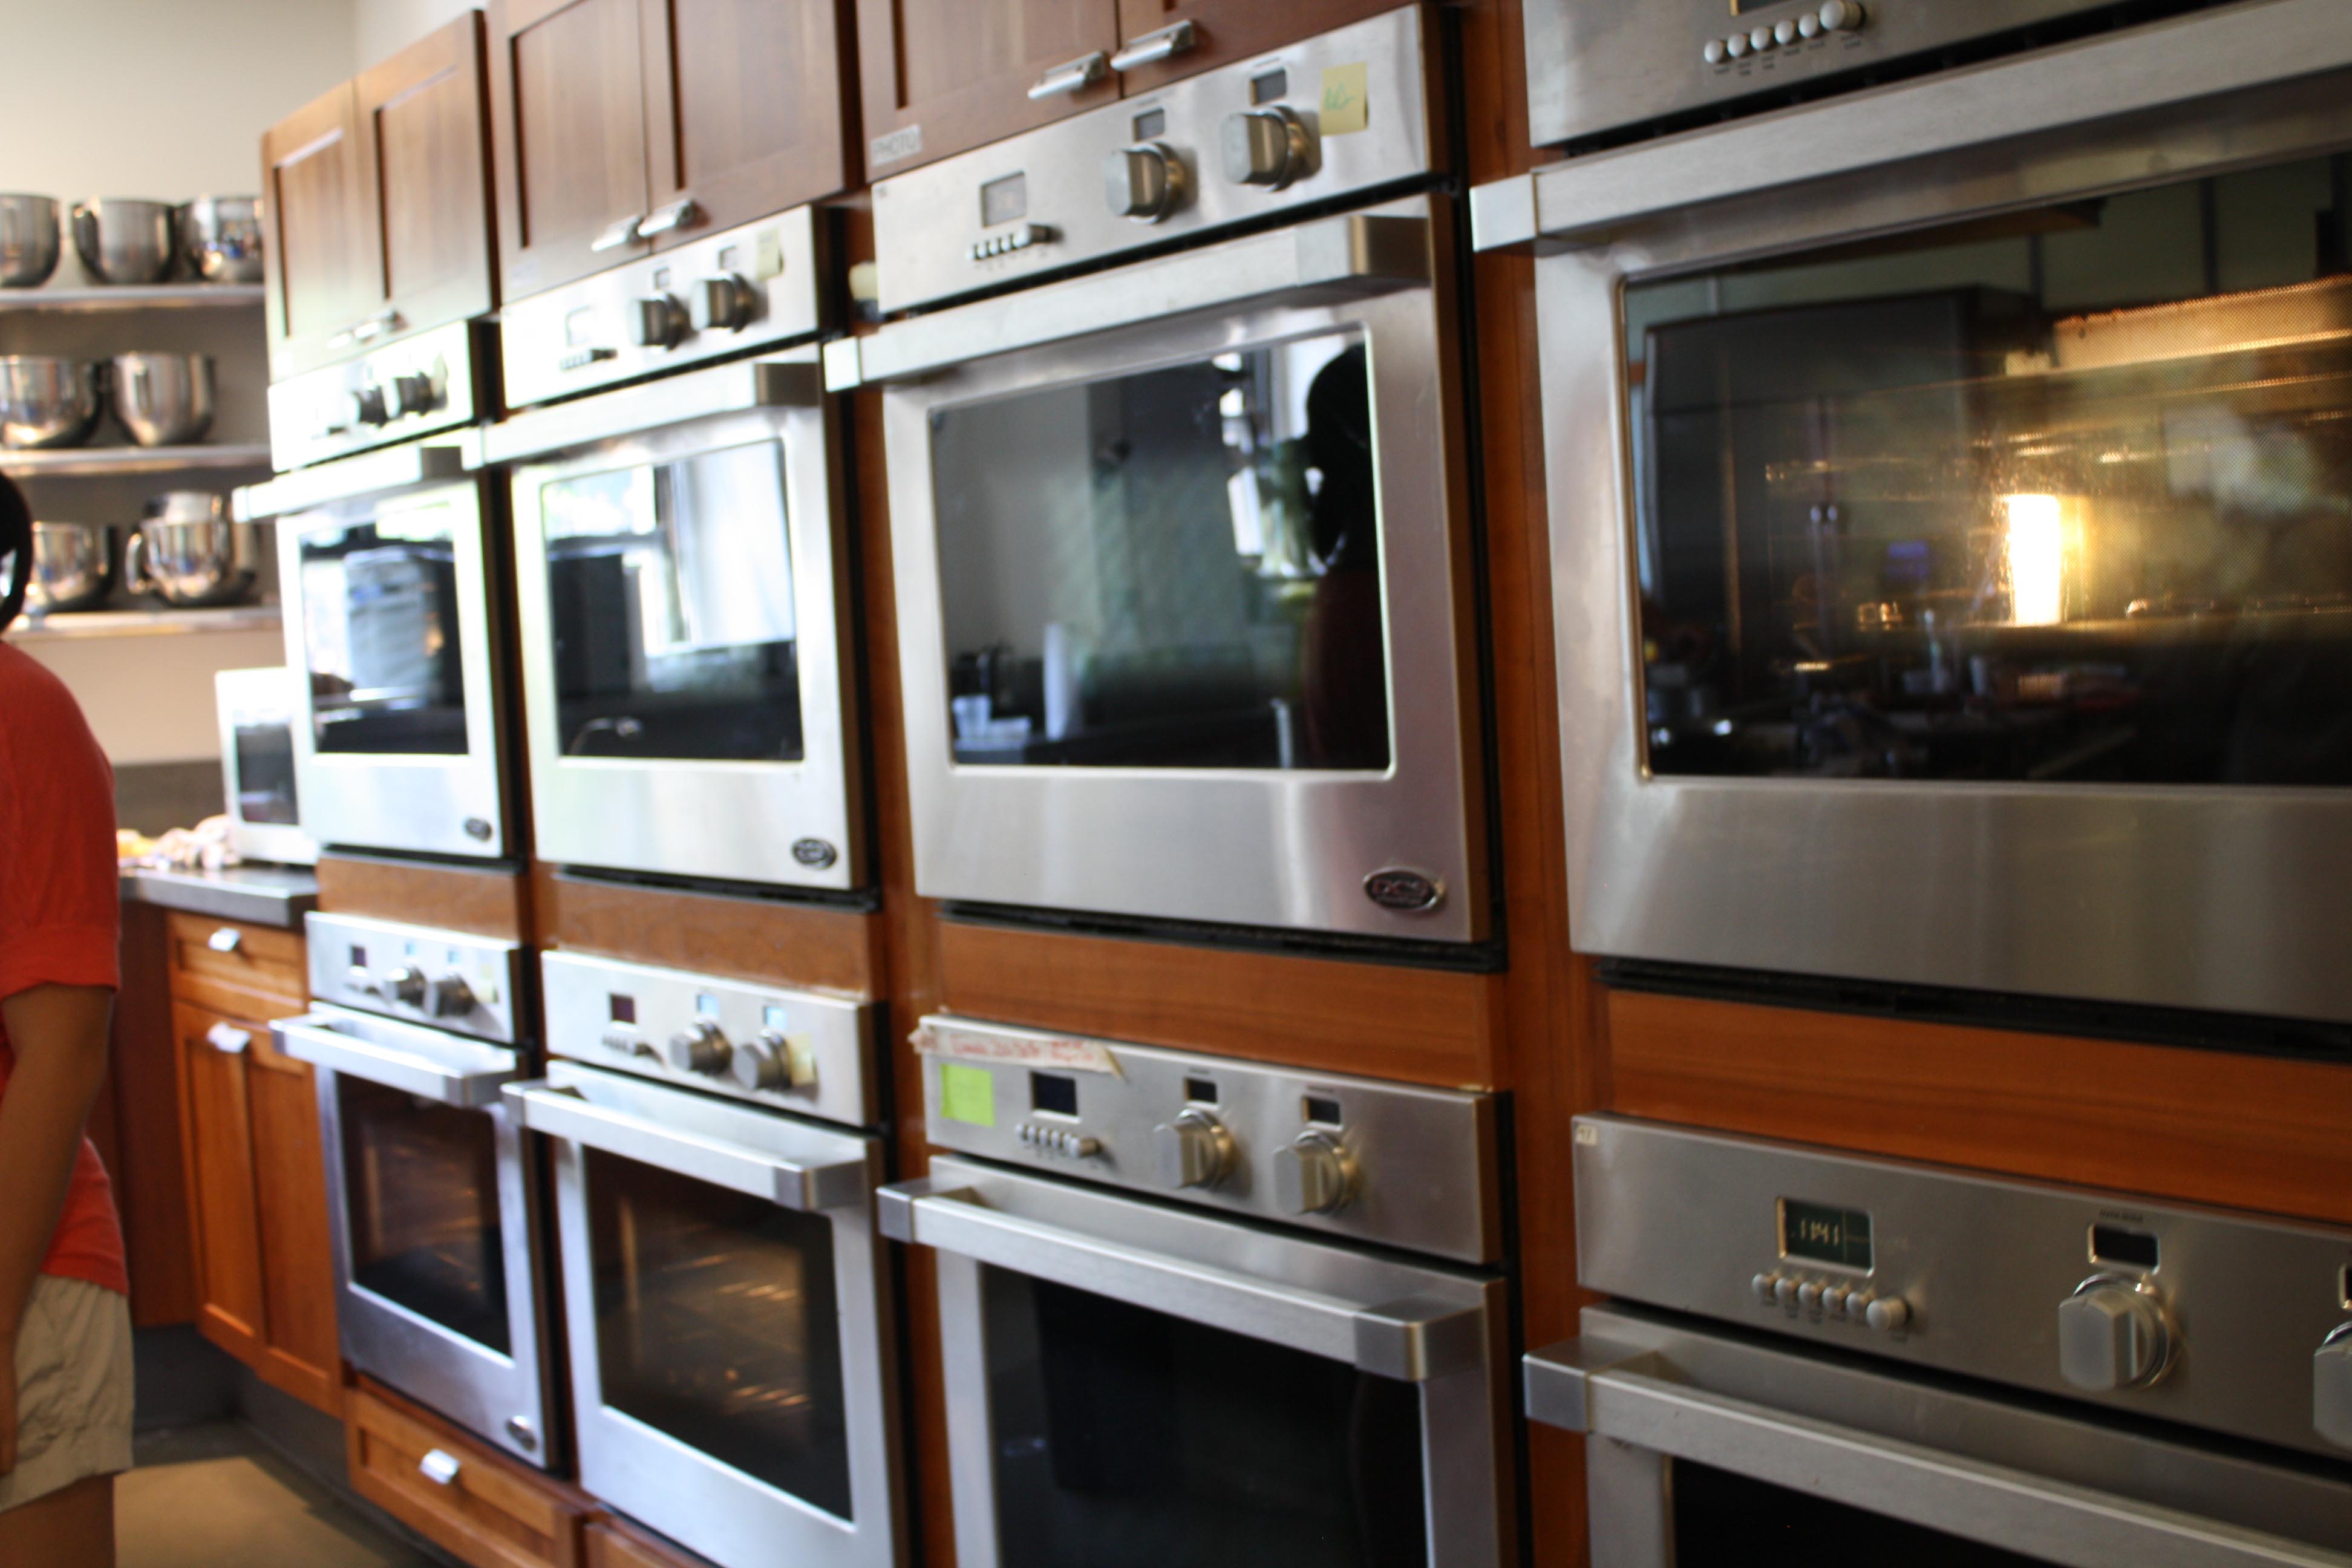 wall ovens america's test kitchen